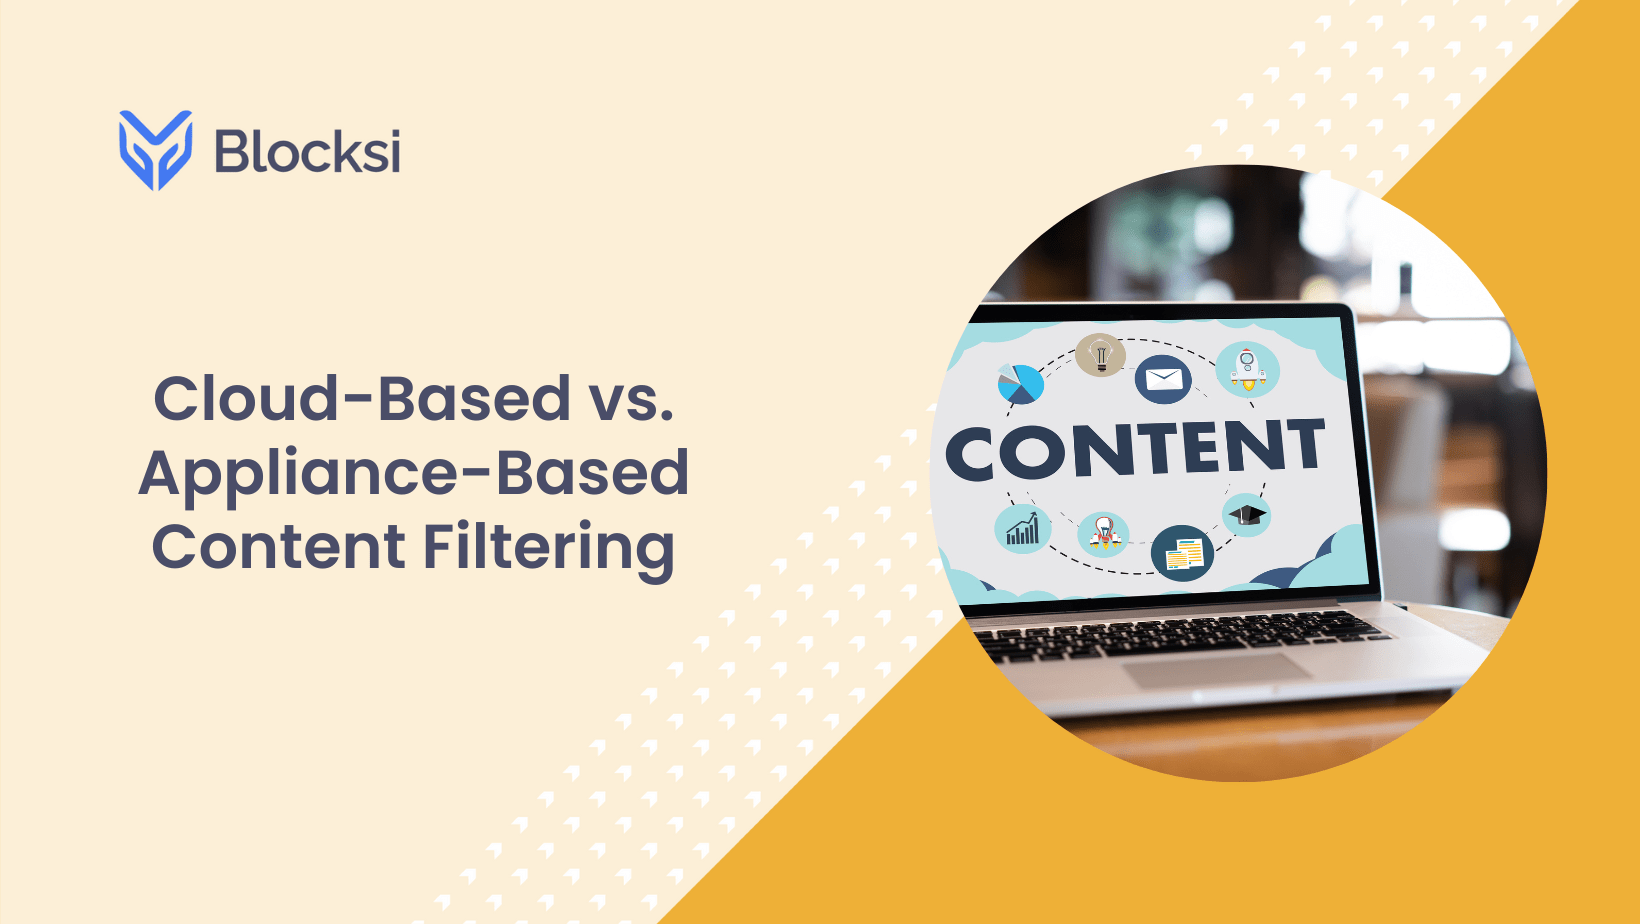 Cloud-Based vs. Appliance-Based Content Filtering